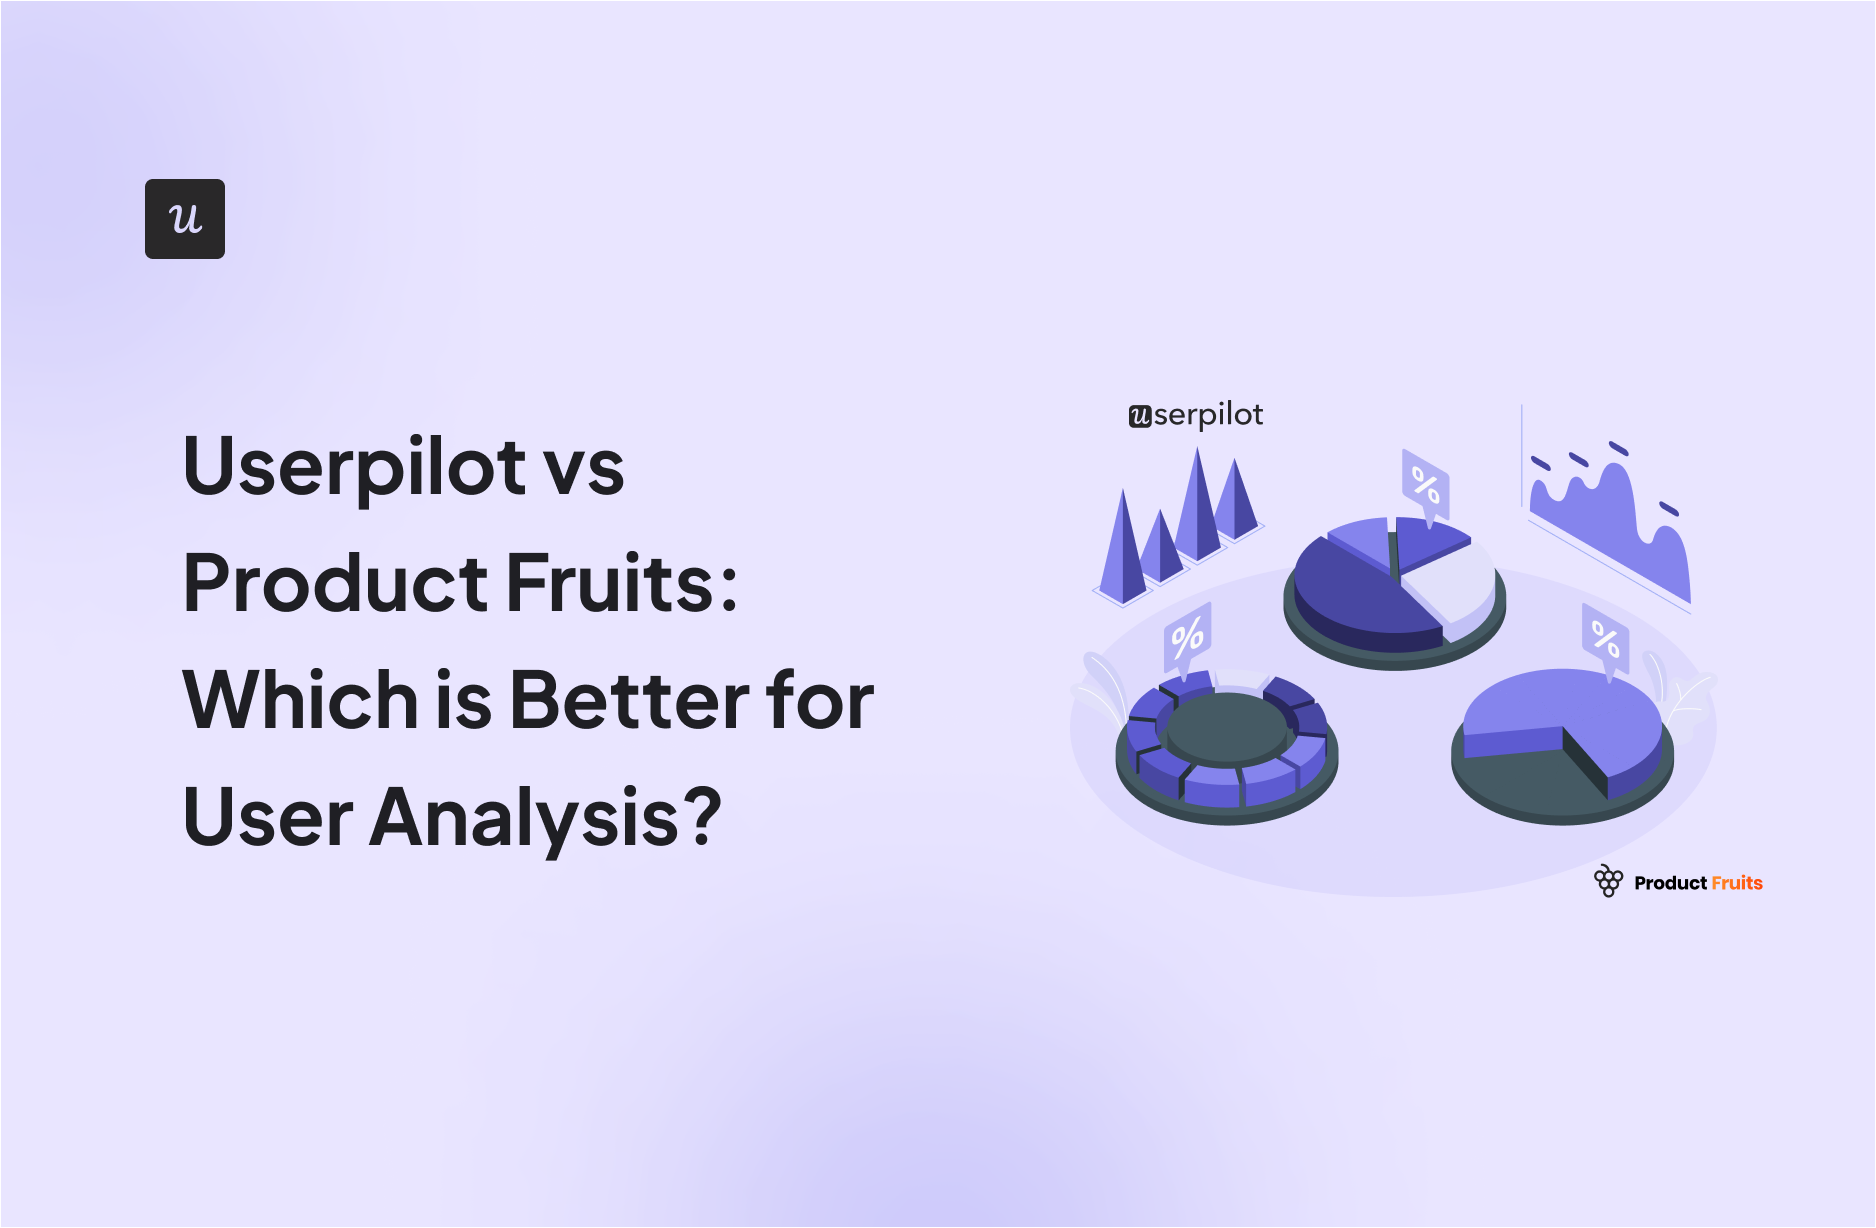 Userpilot vs Product Fruits: Which is Better for User Analysis?